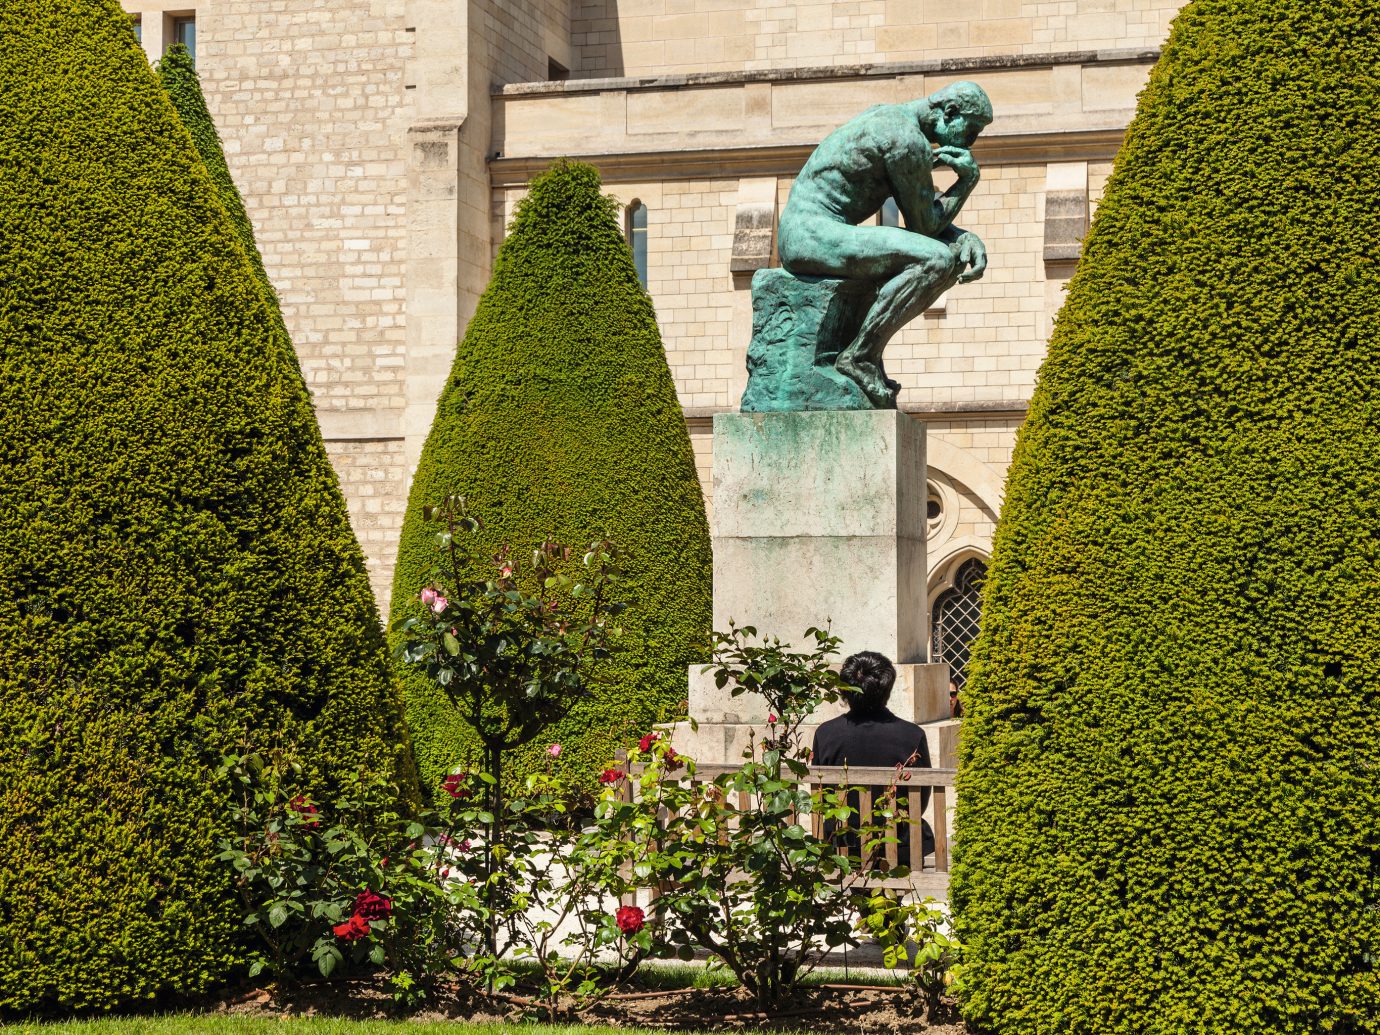 The Thinker statue at Musee Rodin